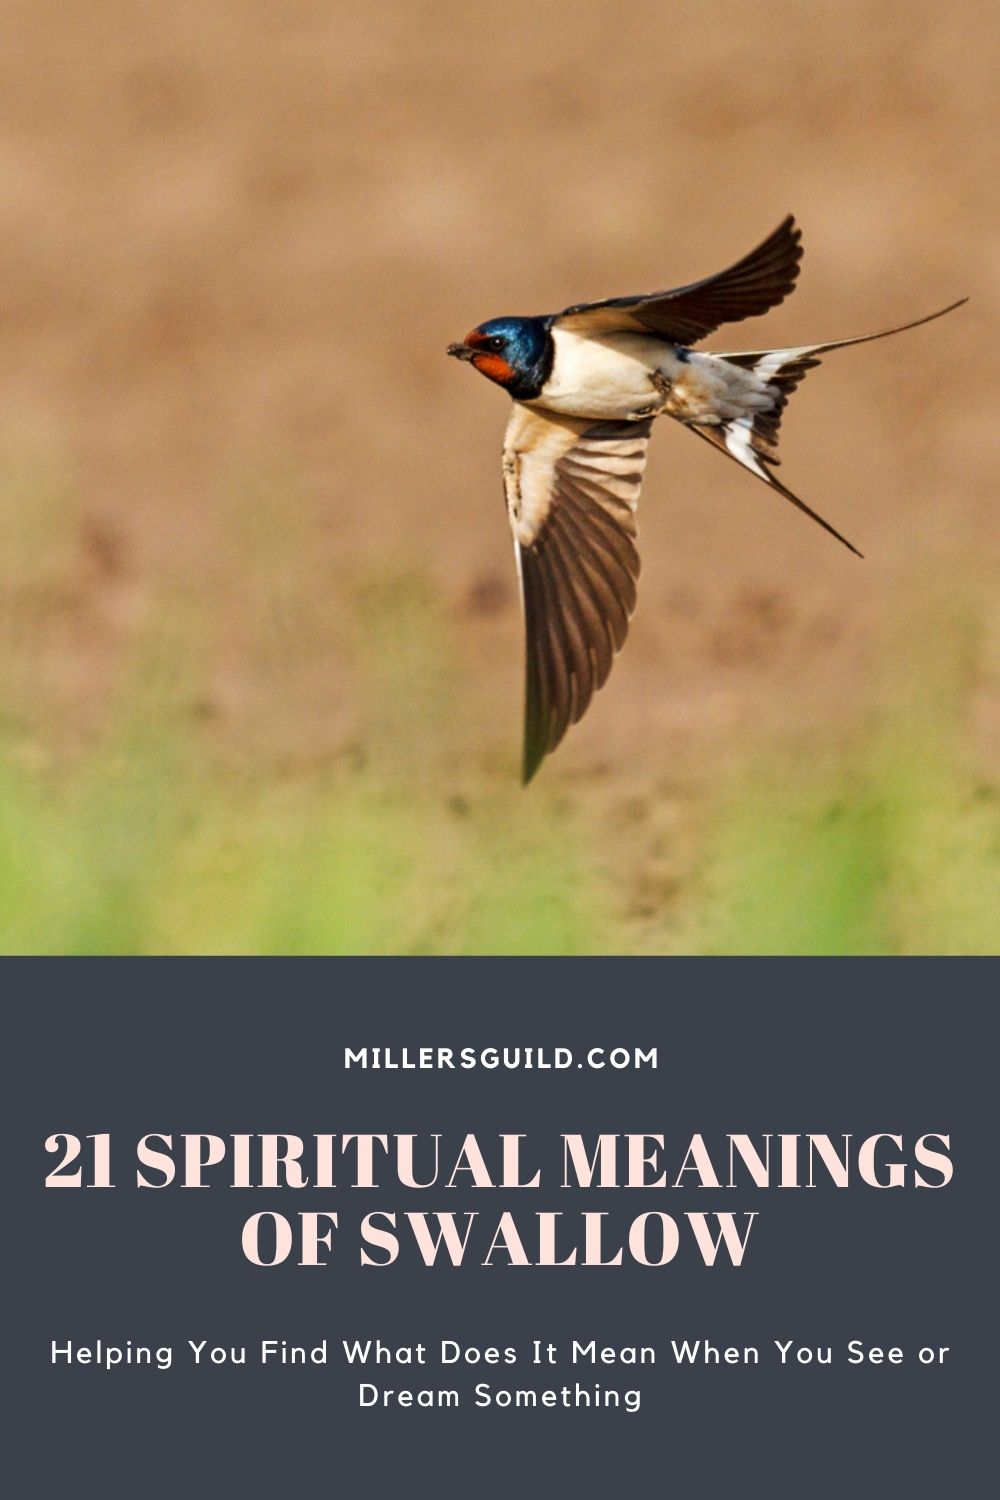 21 Spiritual Meanings of Swallow 2